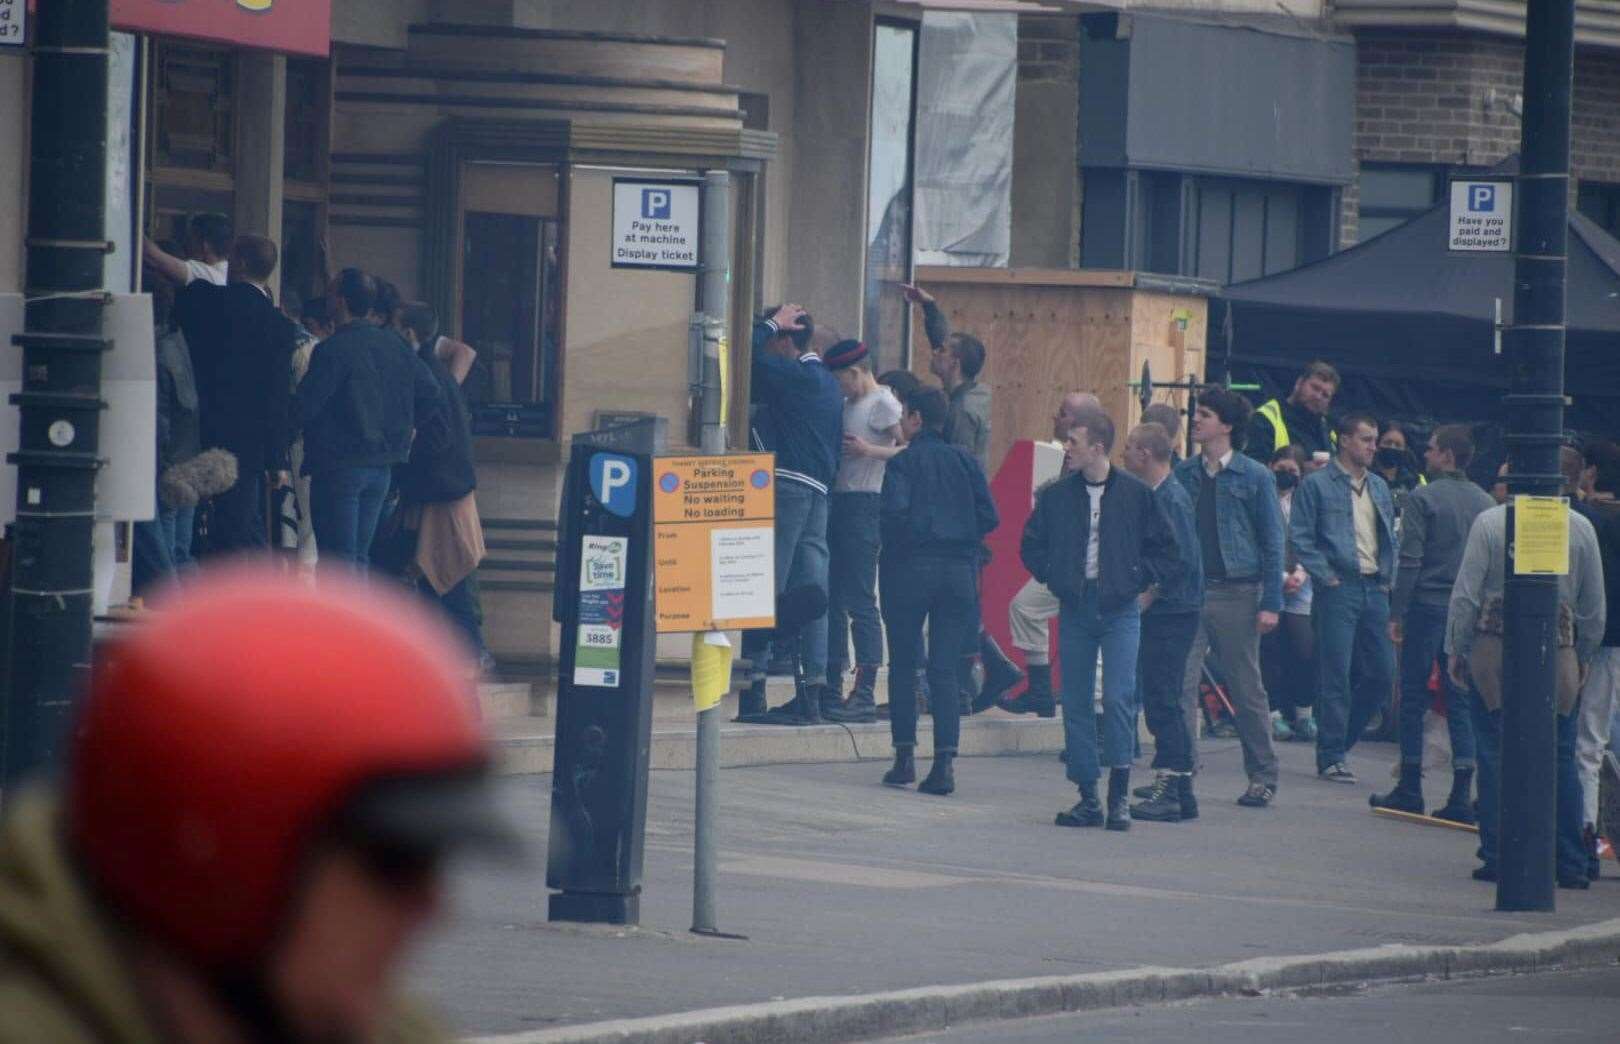 A clash between Mods and skinheads was depicted in the Empire of Light movie filmed in Margate. Picture: Roberto Fabiani